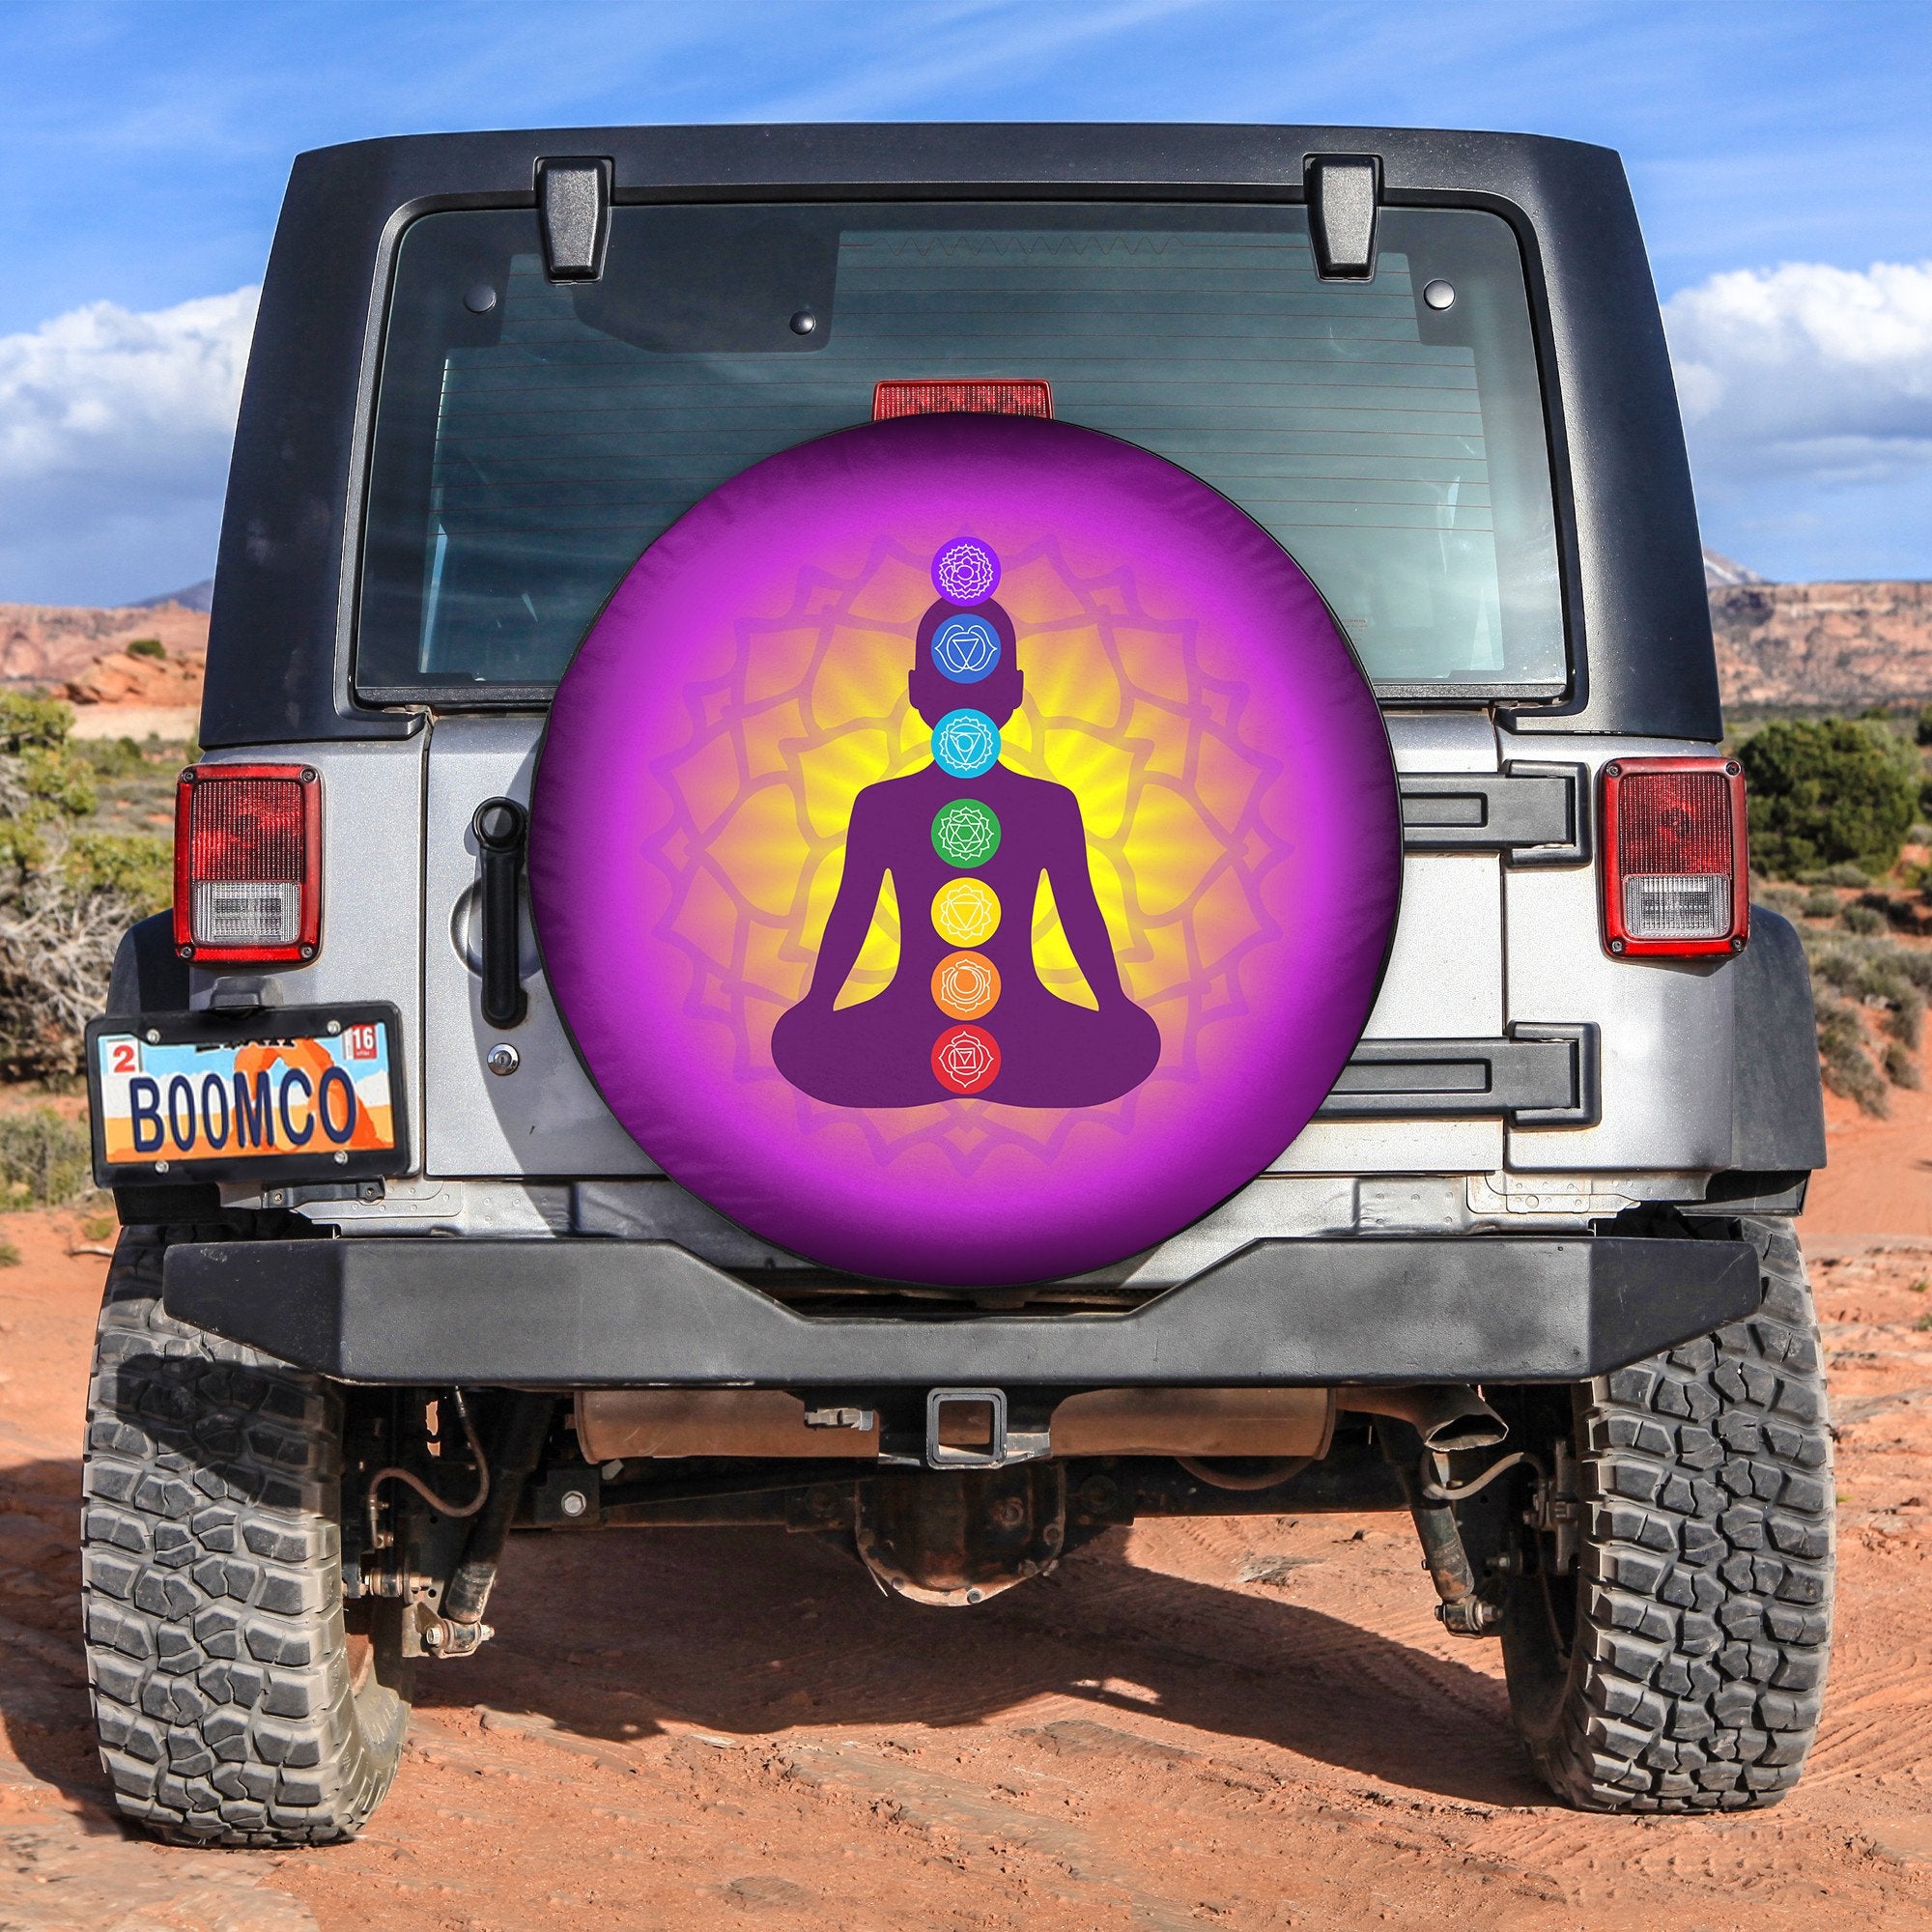 Meditating Human Spare Tire Cover Gift For Campers